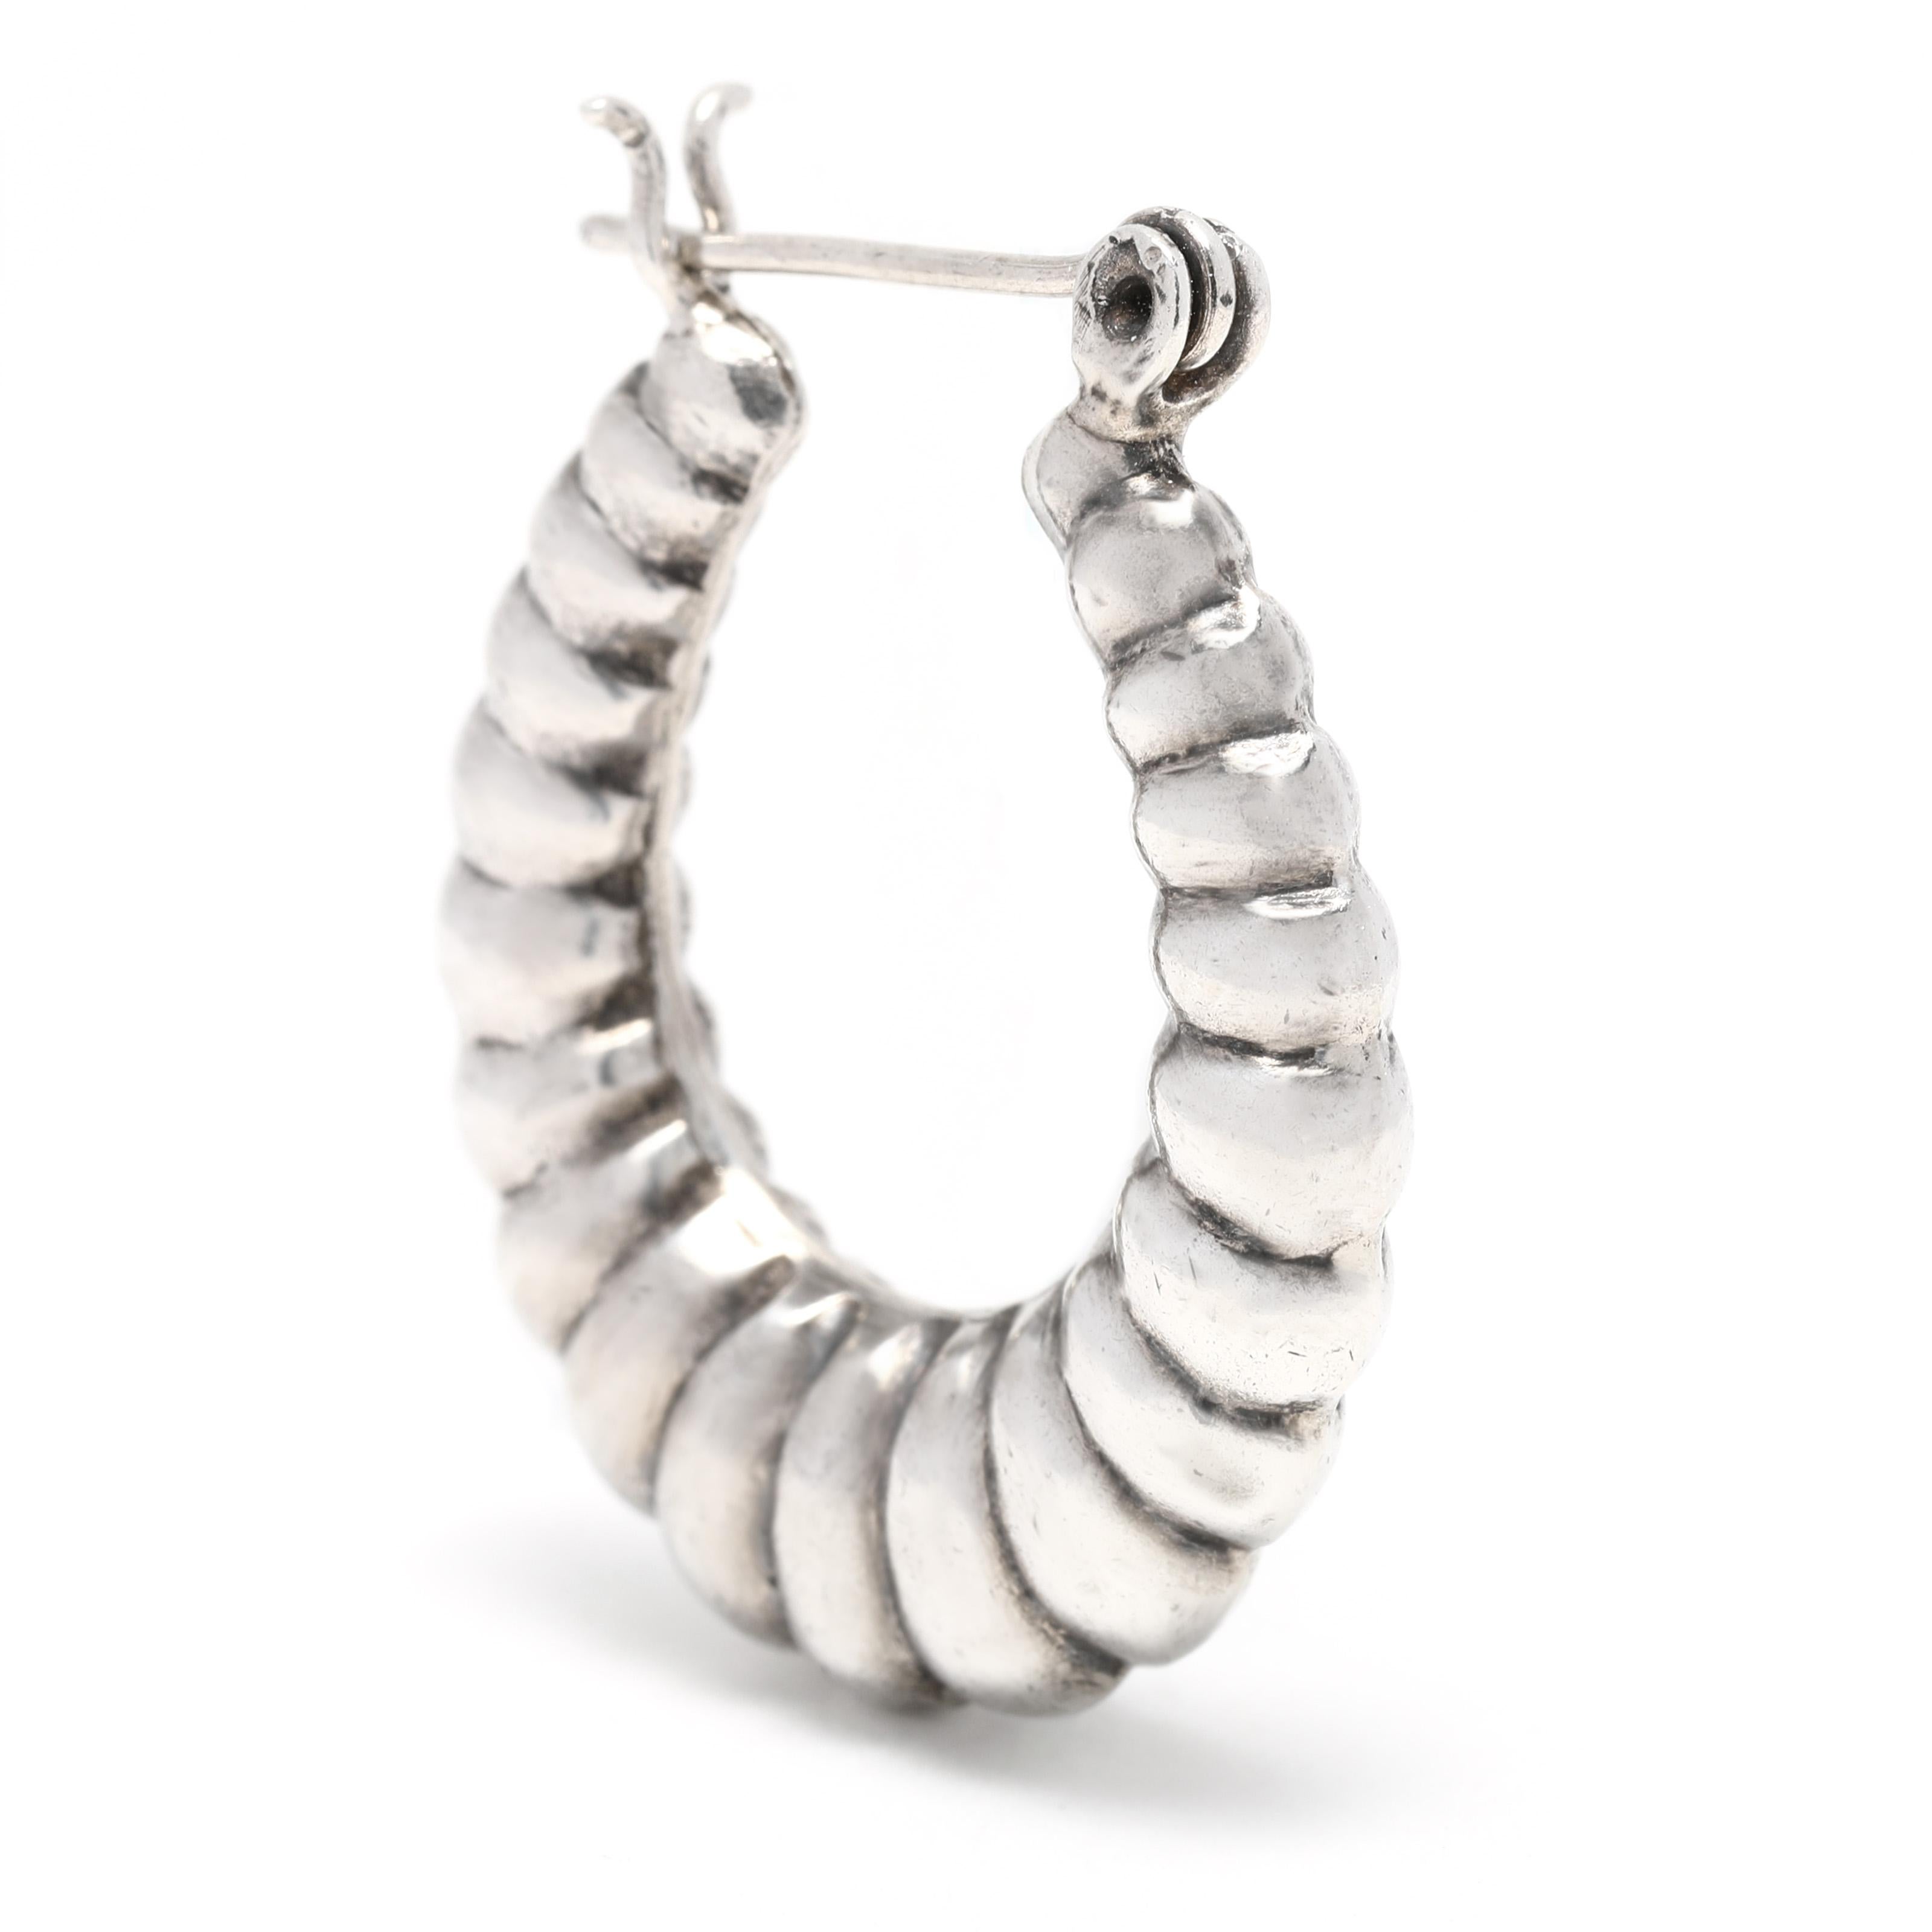 These stunning vintage shrimp hoop earrings are perfect for adding a touch of elegance to any outfit. Crafted in sterling silver, these earrings have a length of 1.24 inches and feature a classic hoop design for a timeless look. These vintage silver